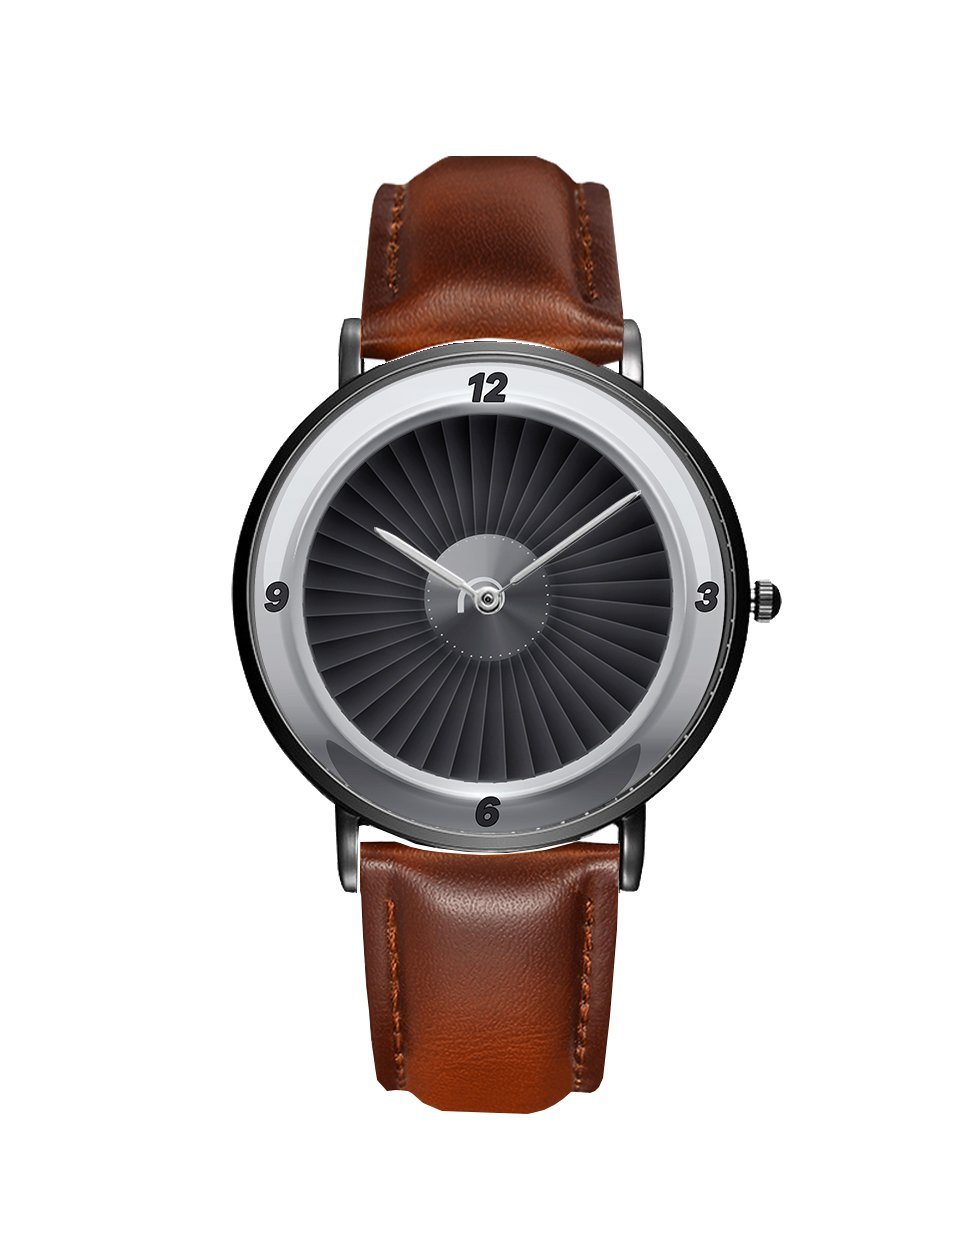 Jet Engine Designed Leather Strap Watches Pilot Eyes Store Black & Brown Leather Strap 